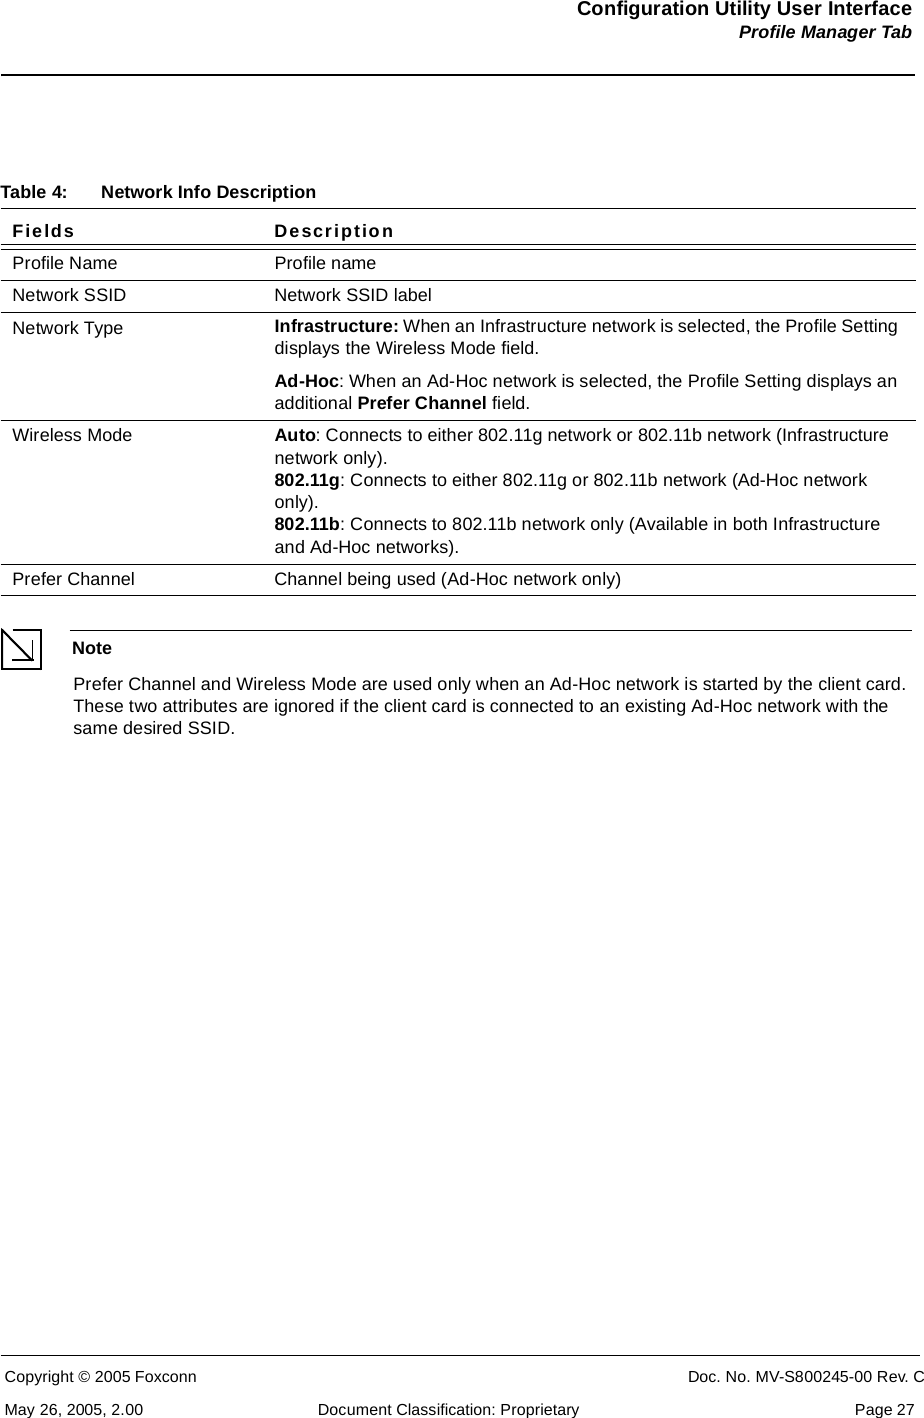 Configuration Utility User InterfaceProfile Manager TabCopyright © 2005 Foxconn CONFIDENTIAL Doc. No. MV-S800245-00 Rev. CMay 26, 2005, 2.00 Document Classification: Proprietary  Page 27NotePrefer Channel and Wireless Mode are used only when an Ad-Hoc network is started by the client card. These two attributes are ignored if the client card is connected to an existing Ad-Hoc network with the same desired SSID.Table 4: Network Info DescriptionFields DescriptionProfile Name Profile nameNetwork SSID Network SSID labelNetwork Type Infrastructure: When an Infrastructure network is selected, the Profile Setting displays the Wireless Mode field. Ad-Hoc: When an Ad-Hoc network is selected, the Profile Setting displays an additional Prefer Channel field.Wireless Mode  Auto: Connects to either 802.11g network or 802.11b network (Infrastructure network only).802.11g: Connects to either 802.11g or 802.11b network (Ad-Hoc network only).802.11b: Connects to 802.11b network only (Available in both Infrastructure and Ad-Hoc networks).Prefer Channel Channel being used (Ad-Hoc network only)